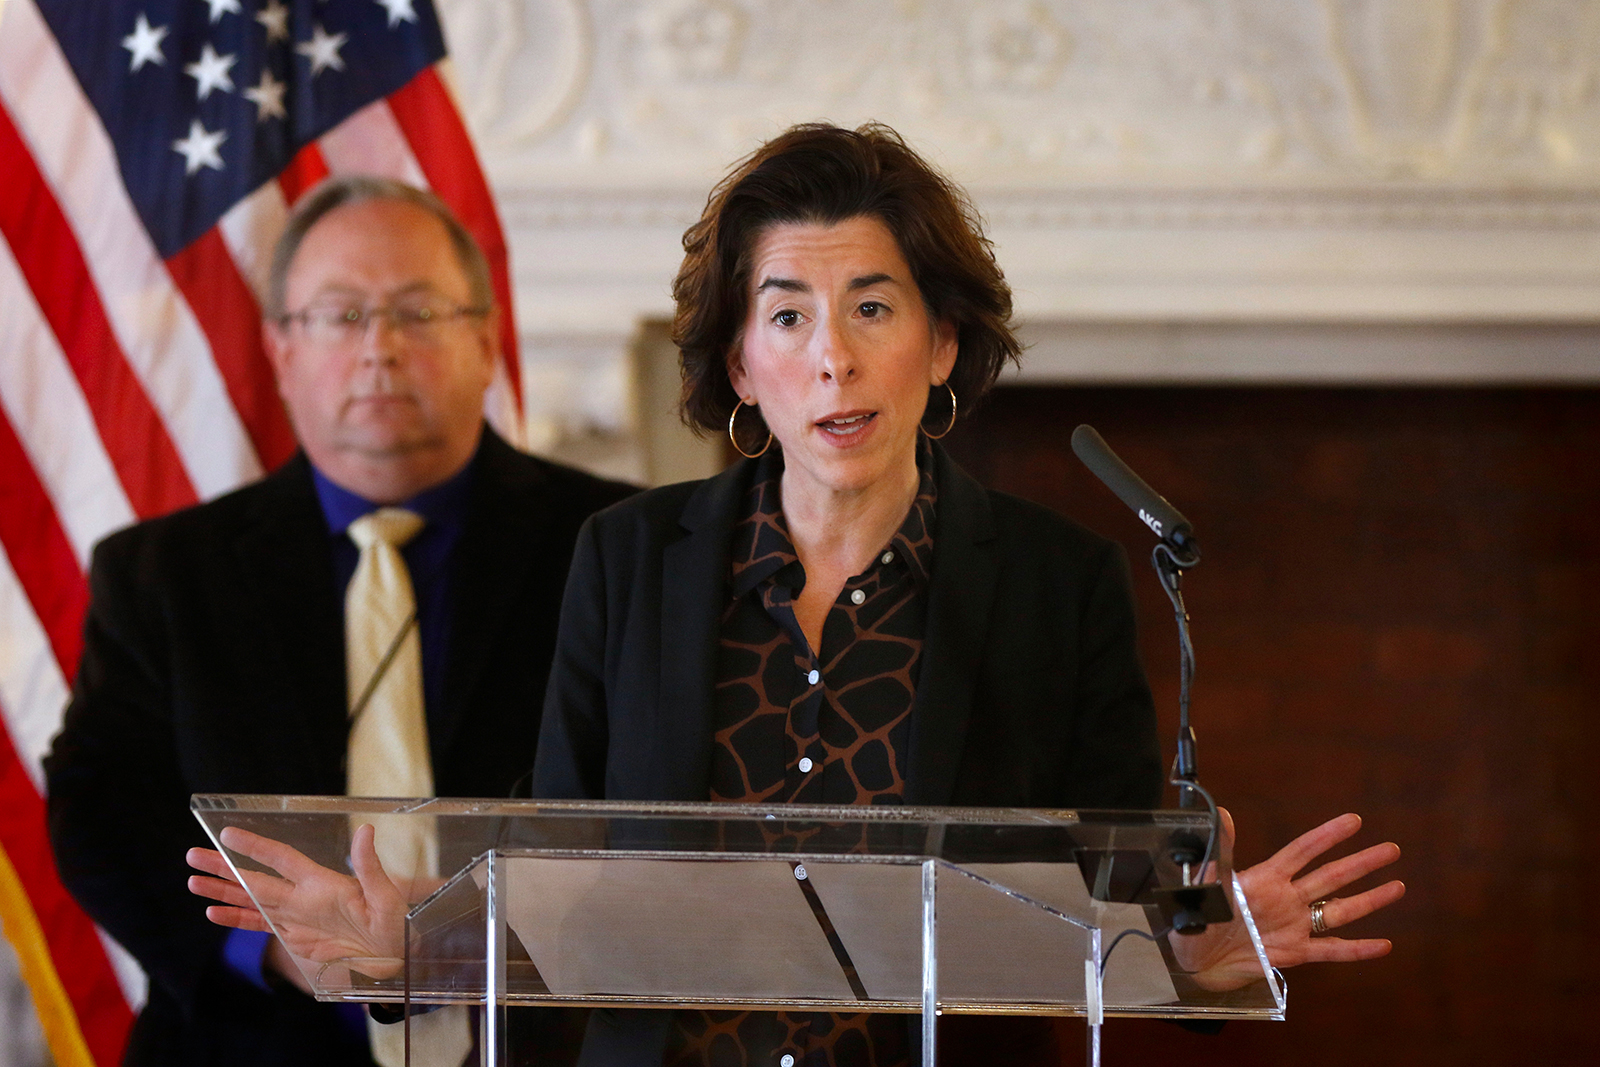 Rhode Island Gov. Gina Raimondo gives an update on the coronavirus during a news conference on March 22.